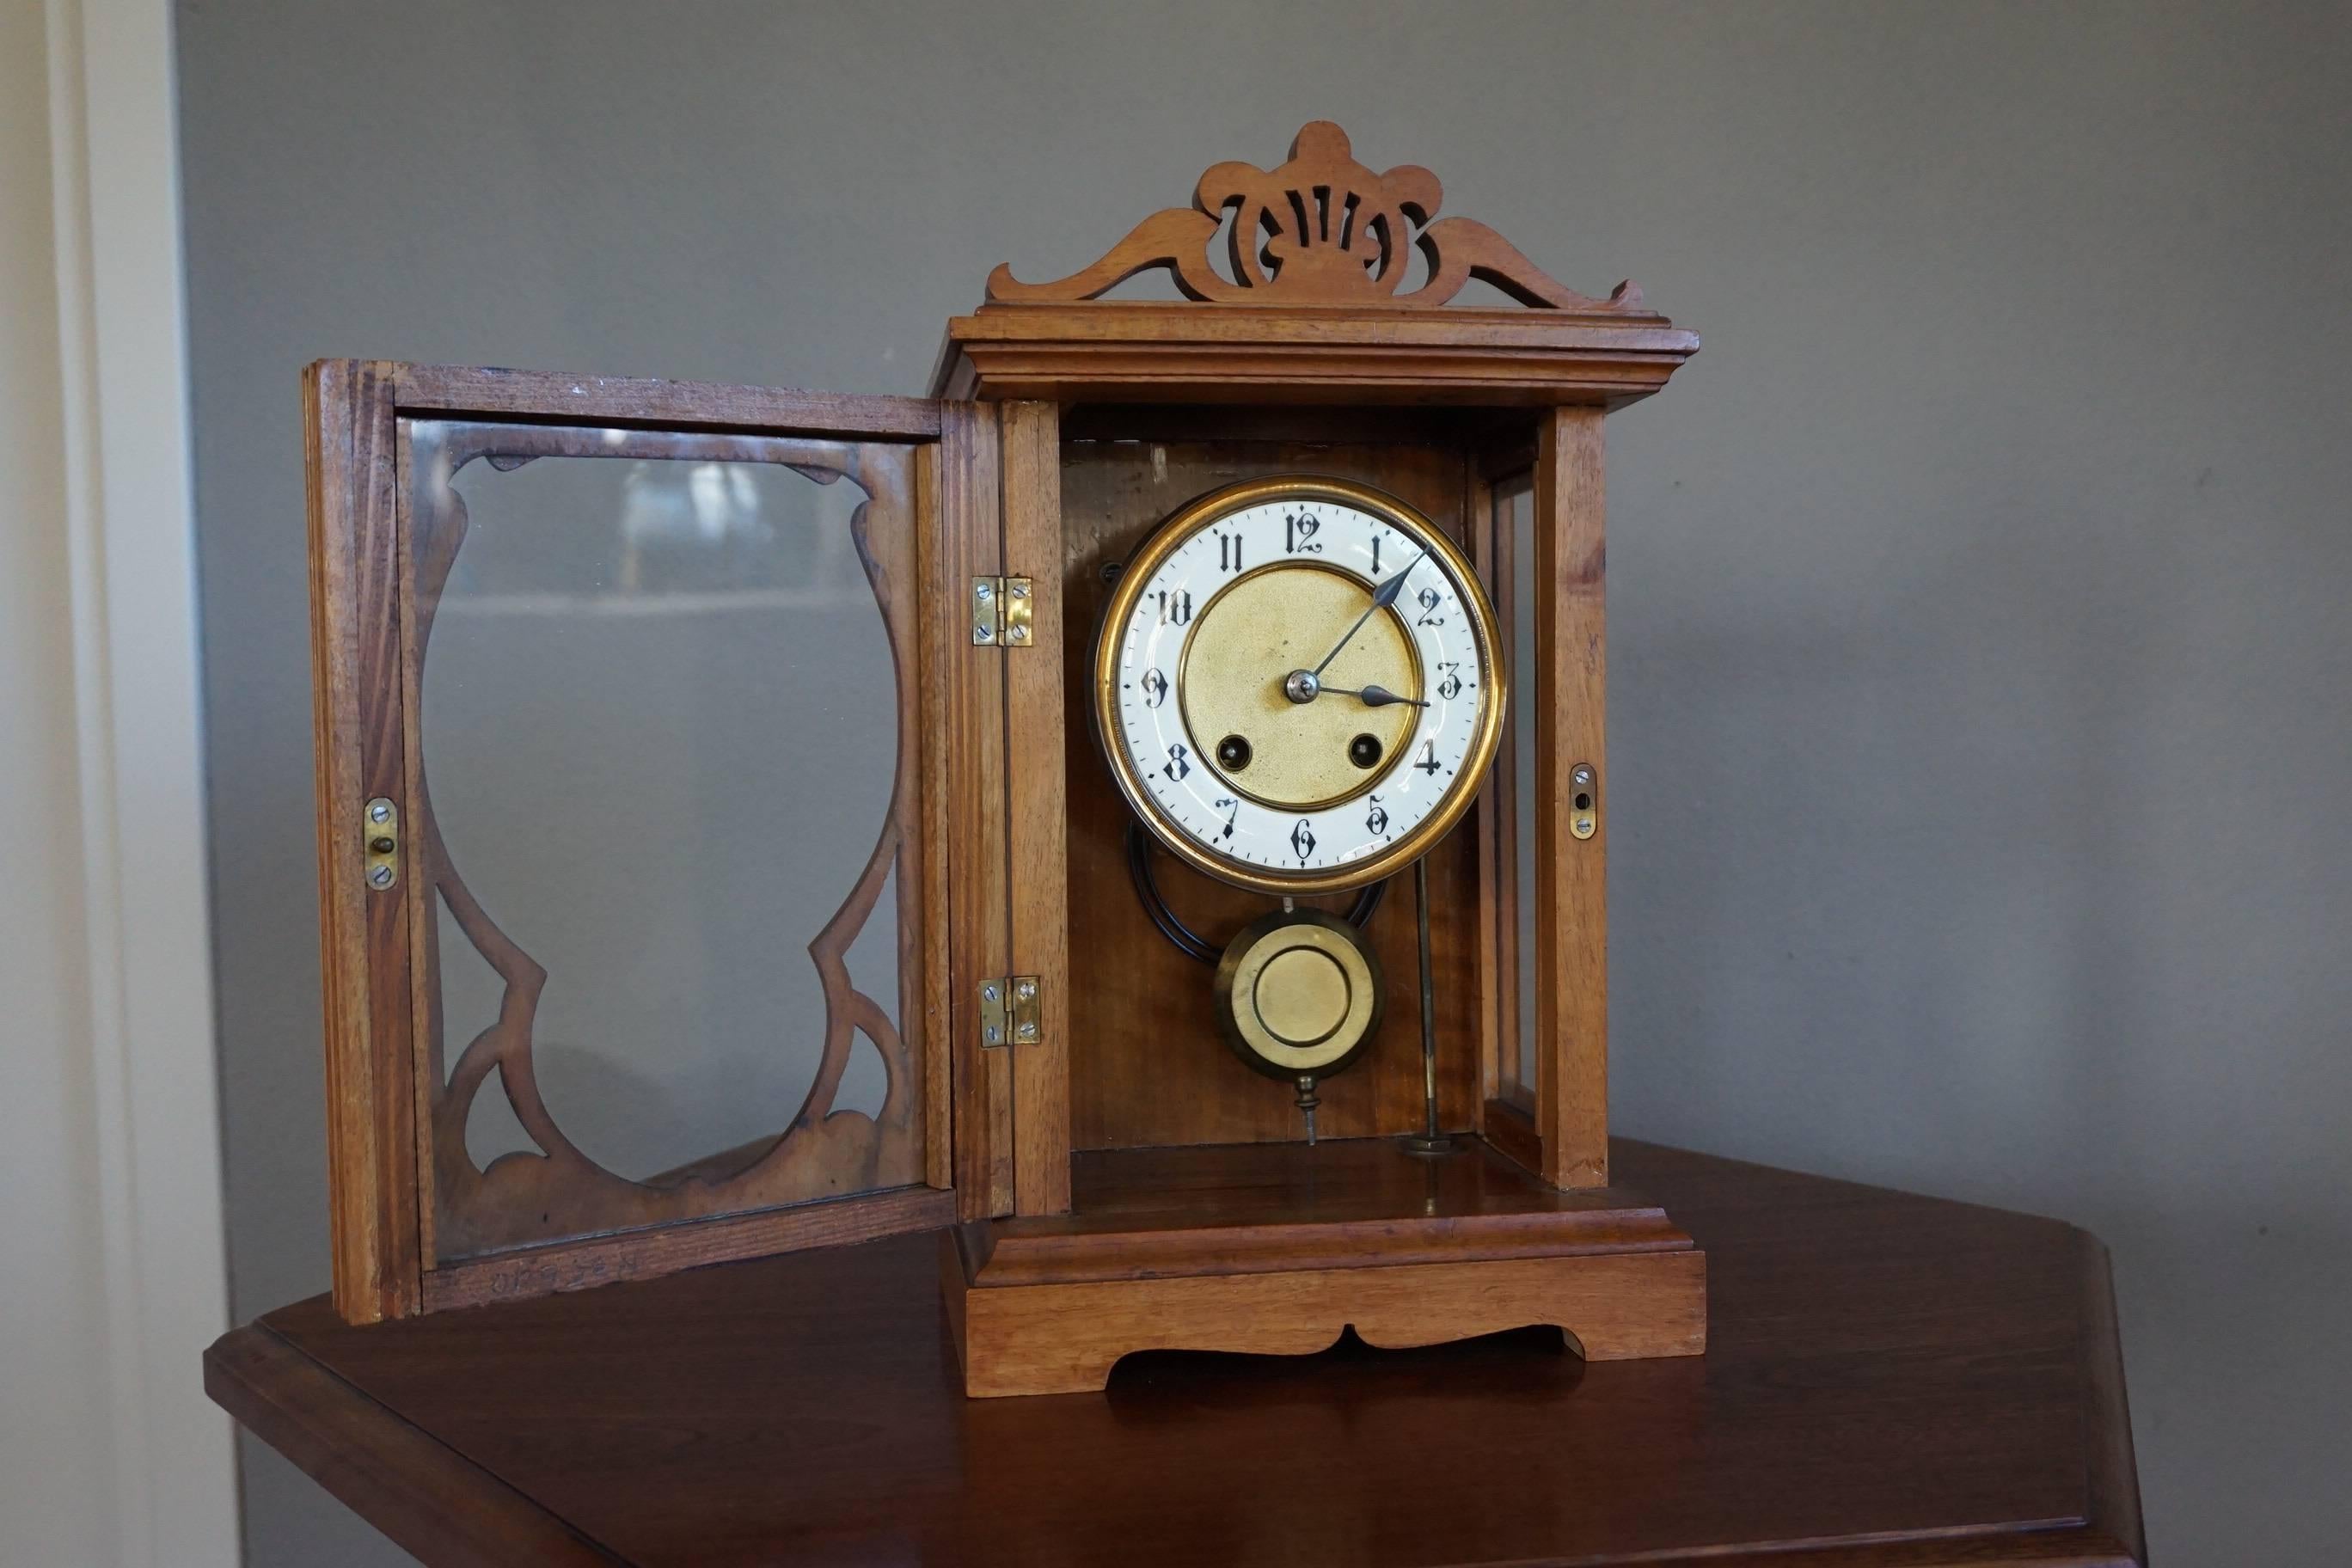 Hand-Crafted Arts and Crafts Mantel or Table Clock of Fruitwood & Glass w. Enameled Dial Face